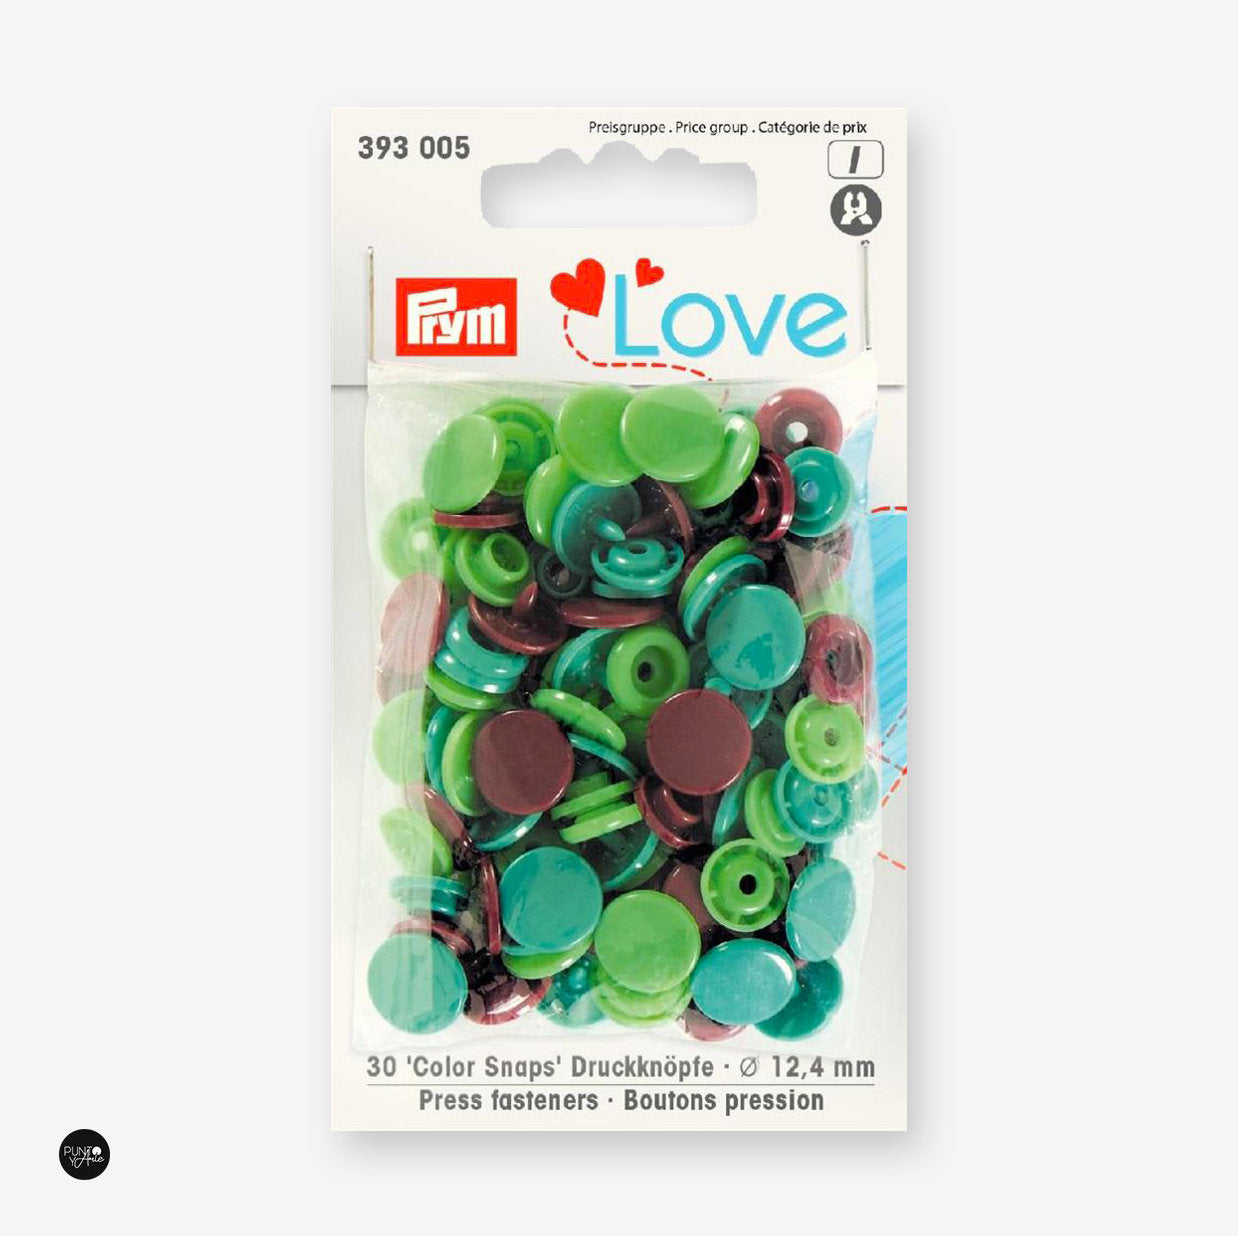 Press Buttons Or Snaps. Green and Brown 12.44 mm - Prym Love 393005